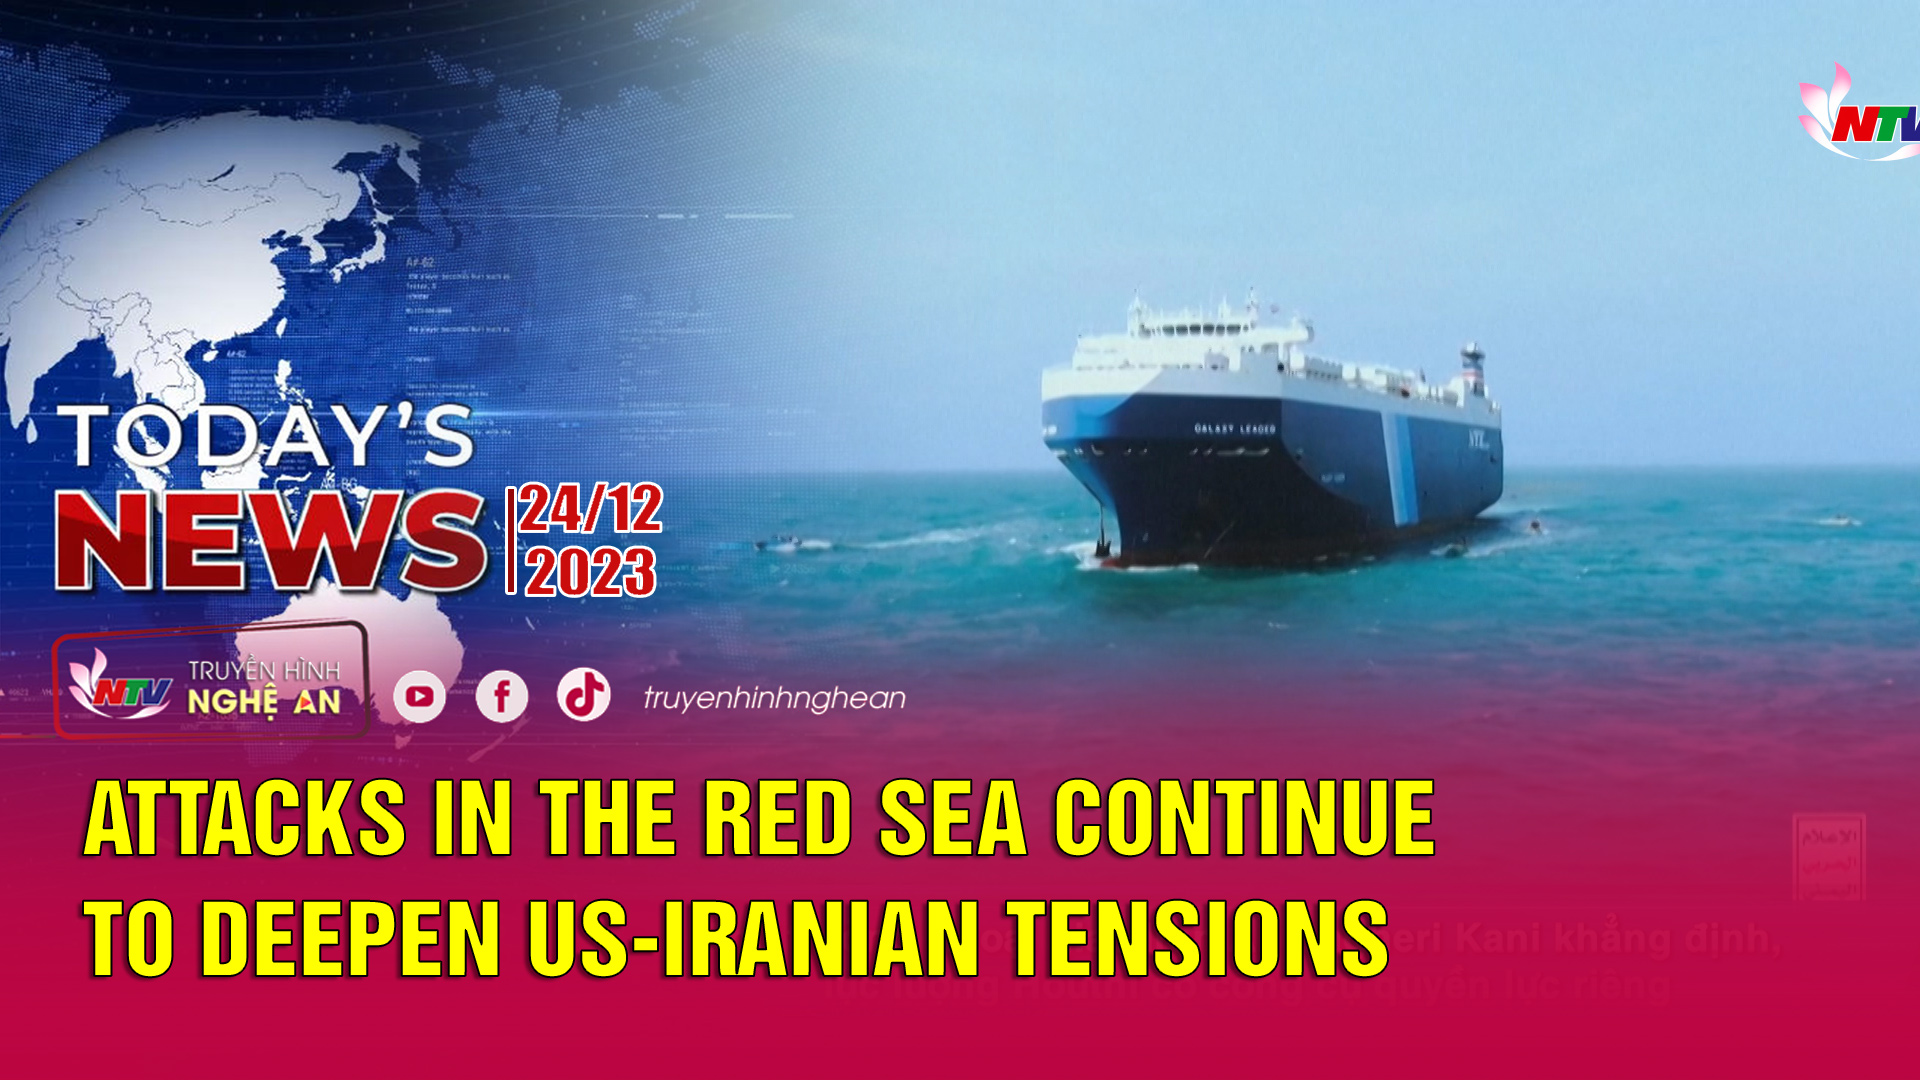 Today's News - 24/12/2023: Attacks in the Red Sea continue to deepen US-Iranian tensions